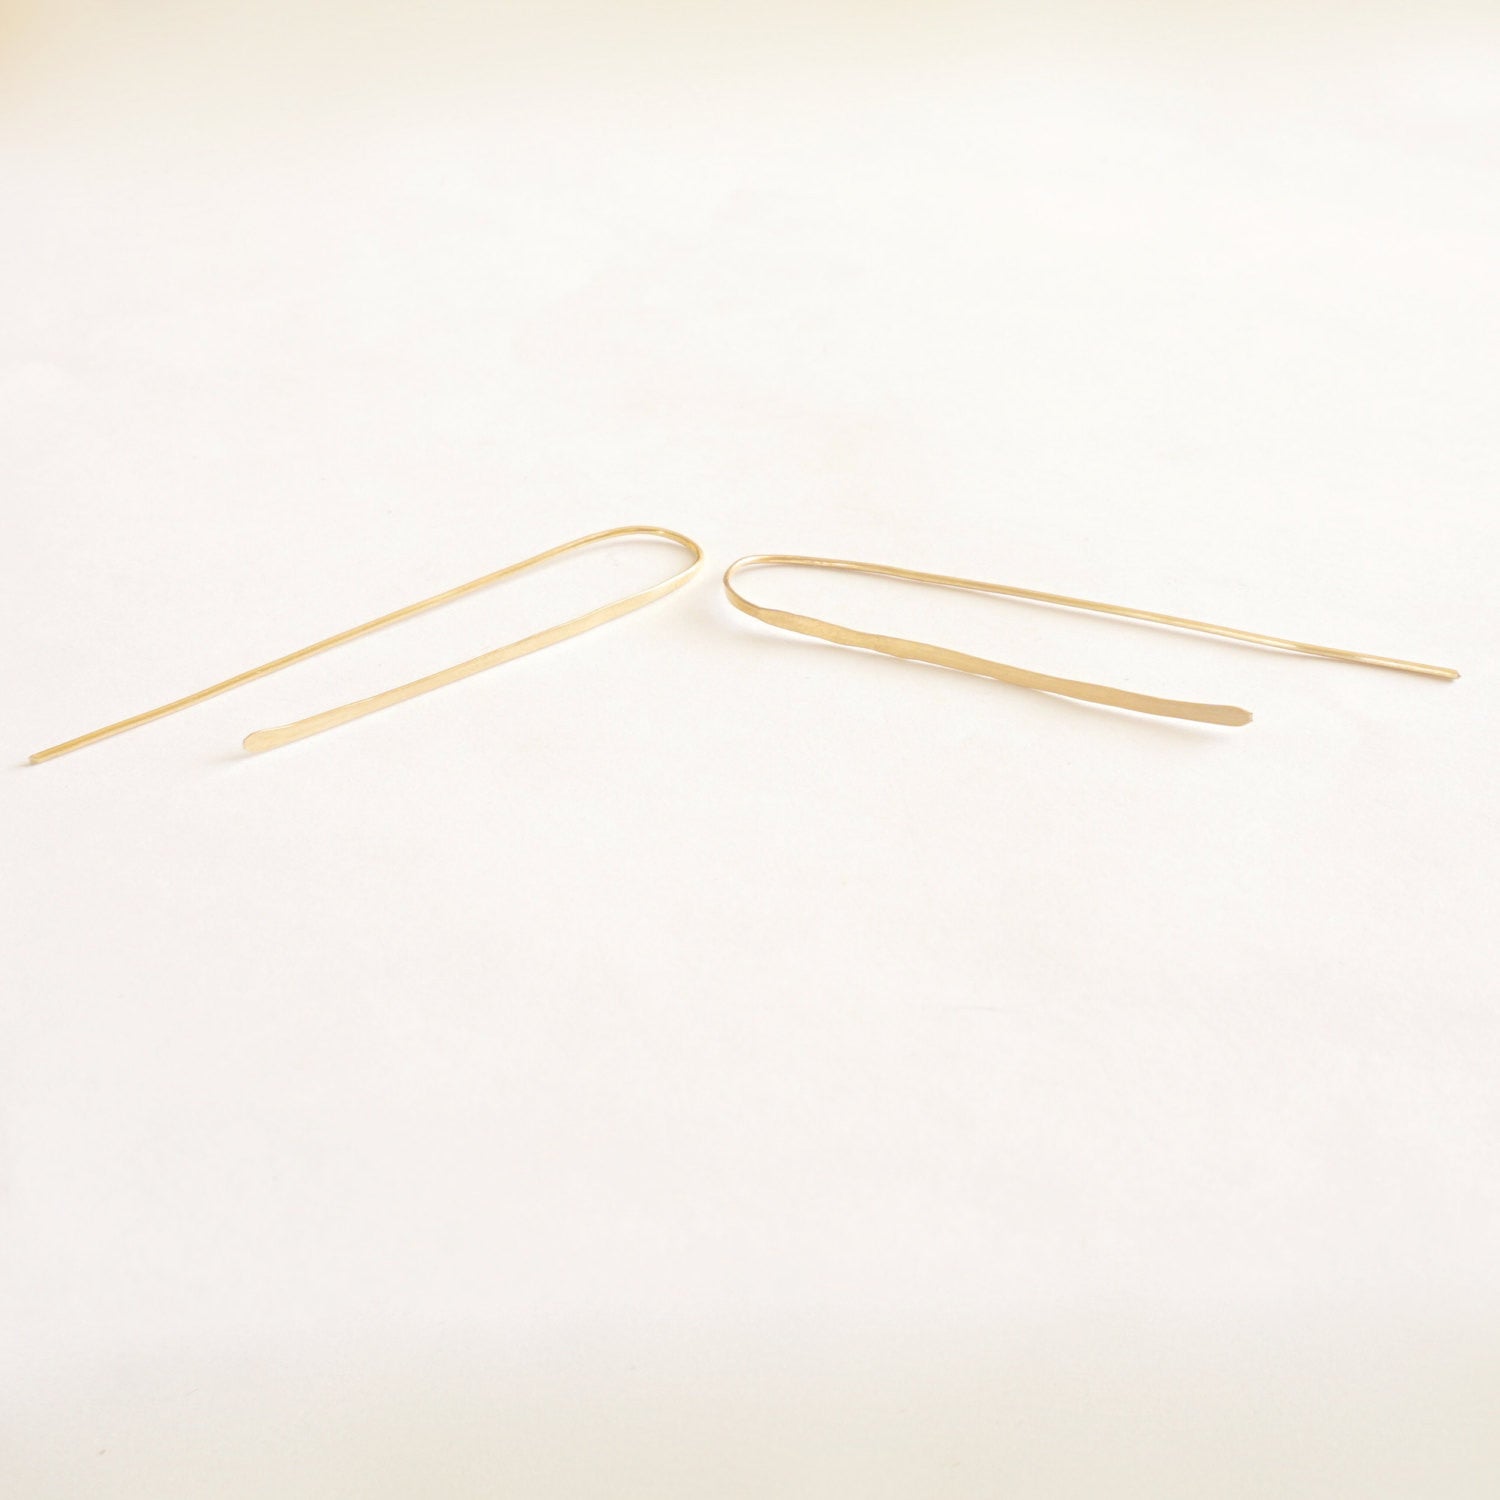 Long Hammered Arc Earrings 026 - Patination Design